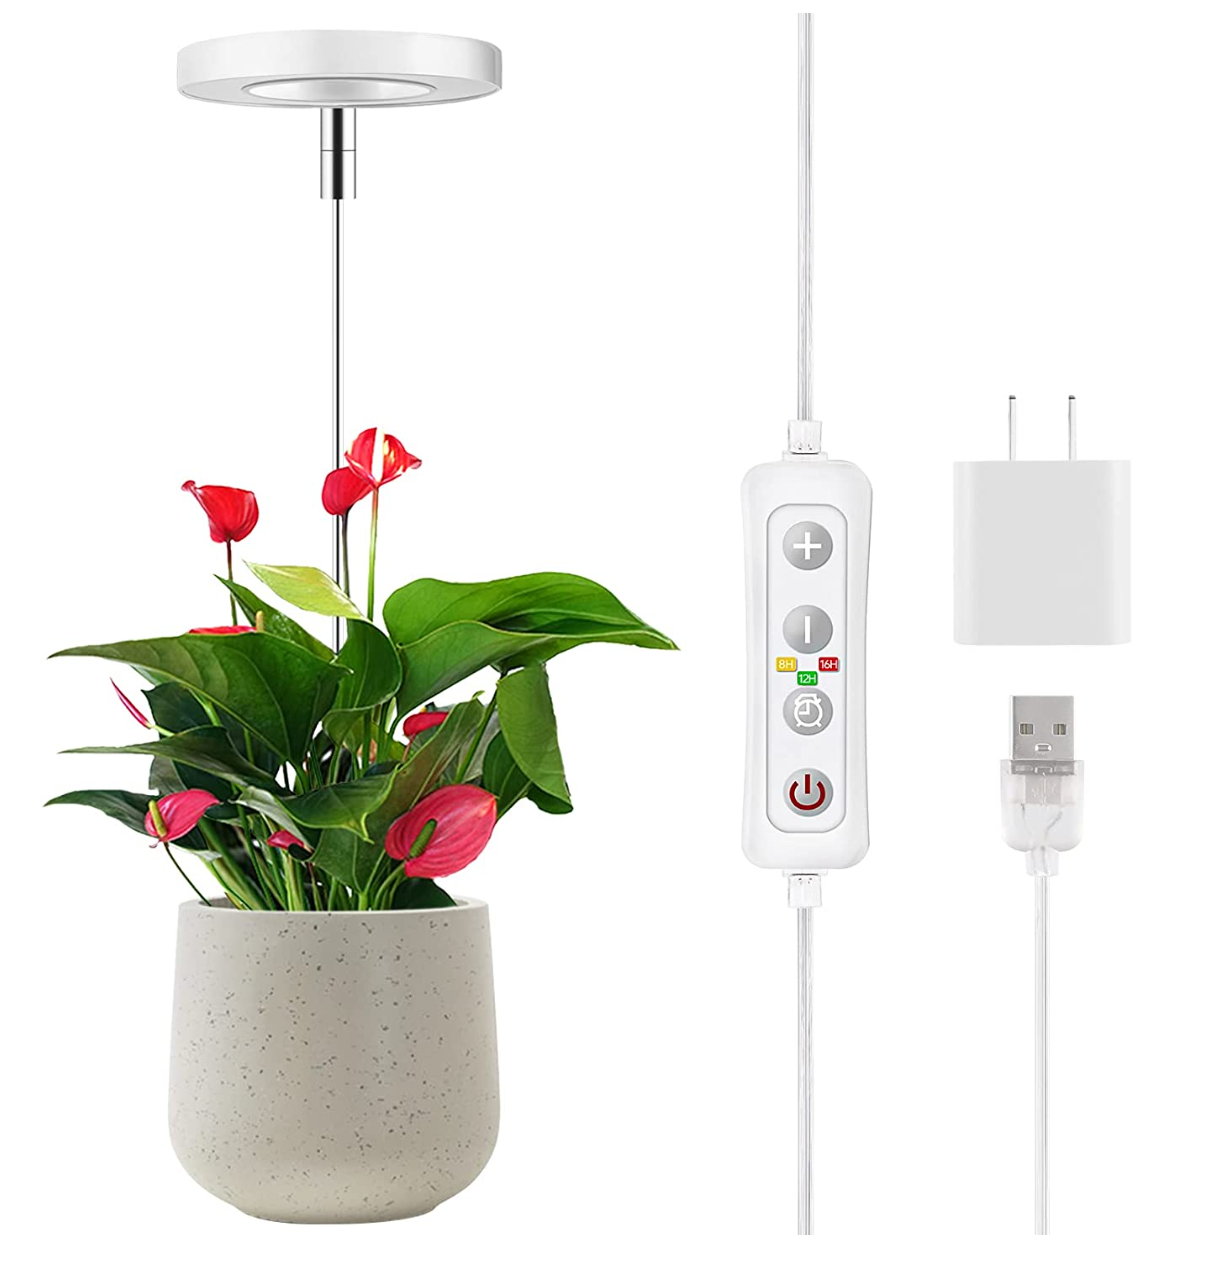 Full Spectrum Sunlike "Grow Light" for Small Indoor Plants - 10 Dimming Levels & Adjustable Height